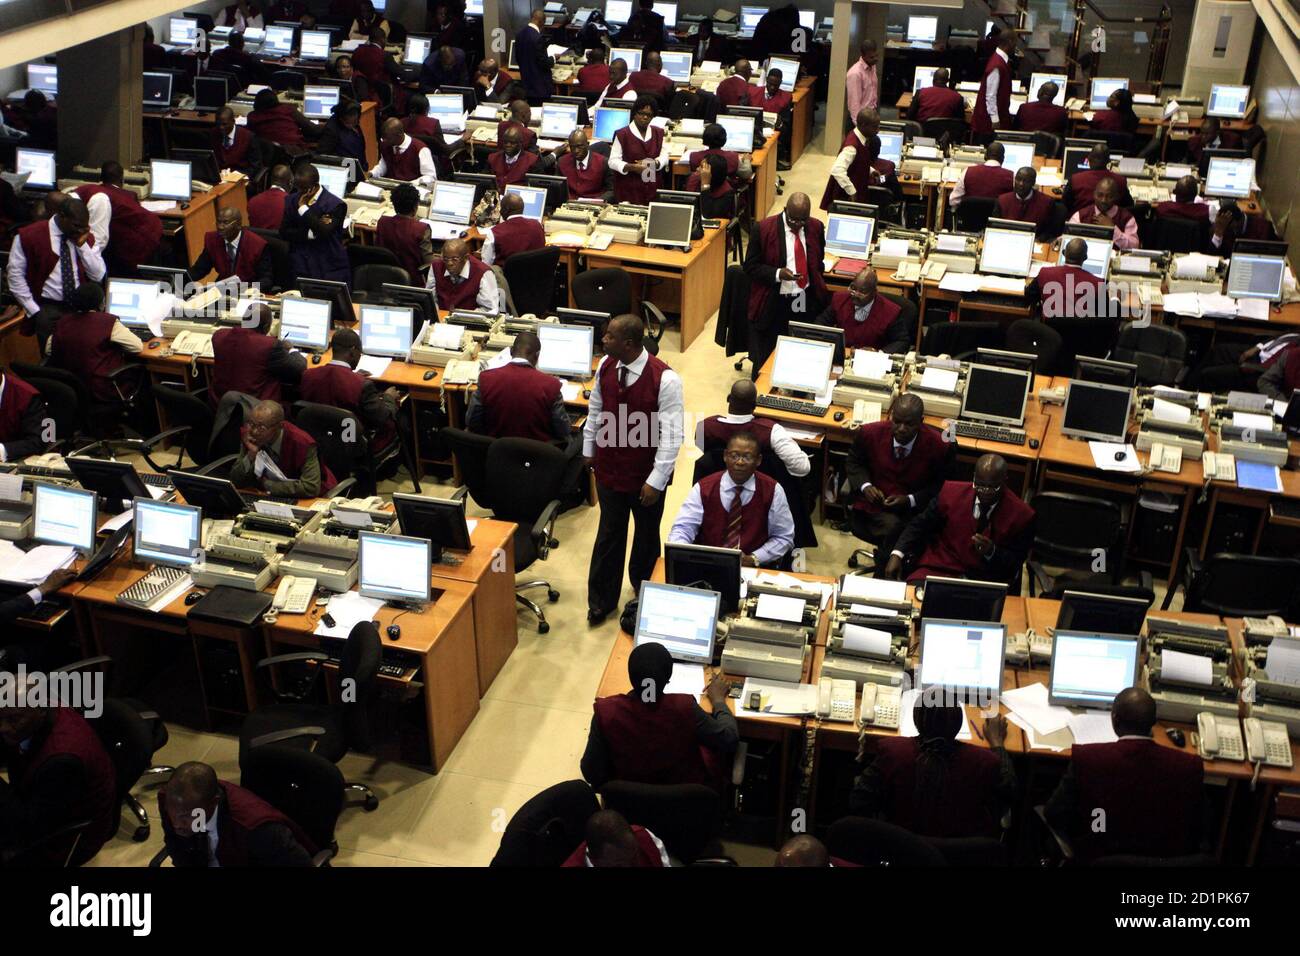 Brokers work on the trading floor of the Nigerian stock exchange in the commercial capital Lagos April 28, 2010. Nigeria's FinBank said on Wednesday its 2009 pre-tax loss widened by 38 percent to 111.23 billion naira ($742 million) due partly to provisioning for risk assets. Gross earnings at Finbank, one of those rescued in a $4 billion sector bailout last year, rose 135 percent to 72.4 billion naira during the period, the bank said in a filing to the Nigerian Stock Exchange.      REUTERS/Akintunde Akinleye(NIGERIA - Tags: BUSINESS) Stock Photo